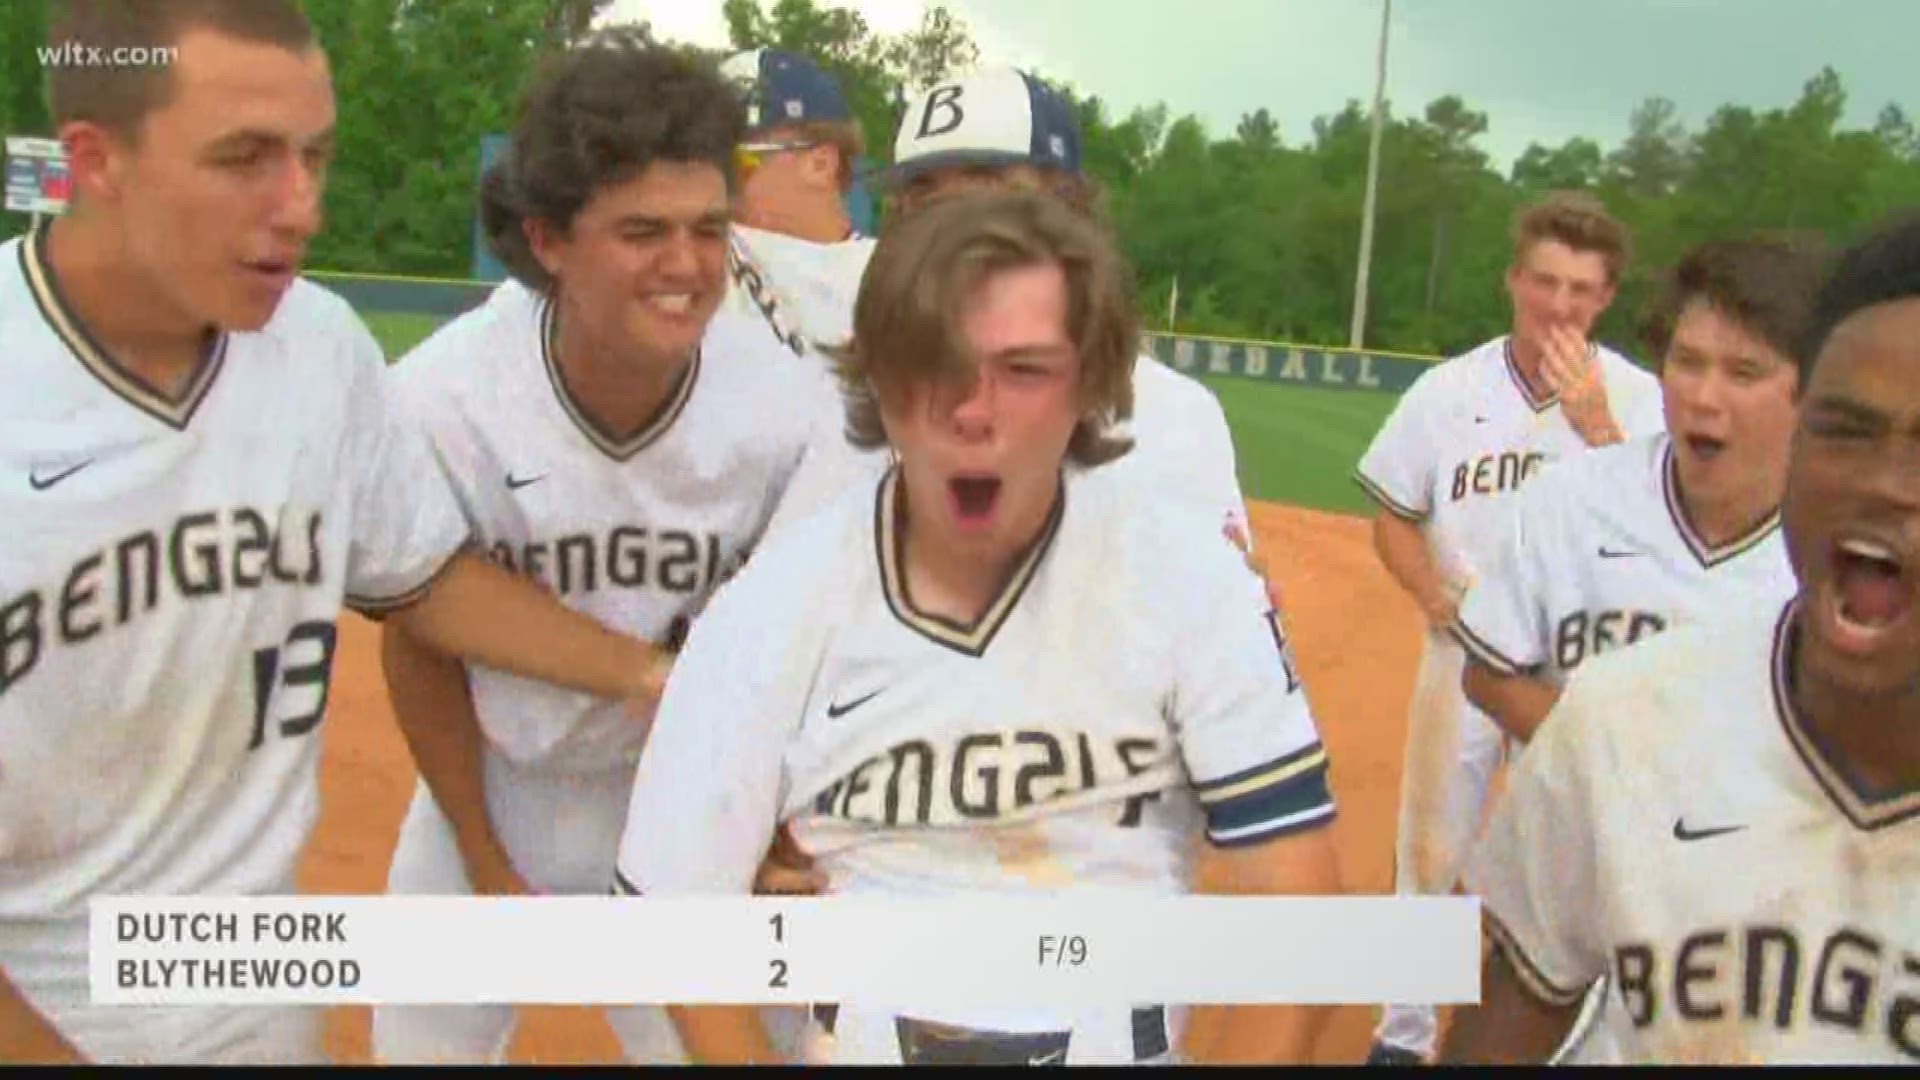 The Blythewood Bengals found a way to win in a close game that ended with a walk-off hit from senior Zach Bailes. The Bengals lead the 5A state baseball championship series over Dutch Fork 1-0 in the best of three series after a thrilling 2-1 game in ended in extra innings.